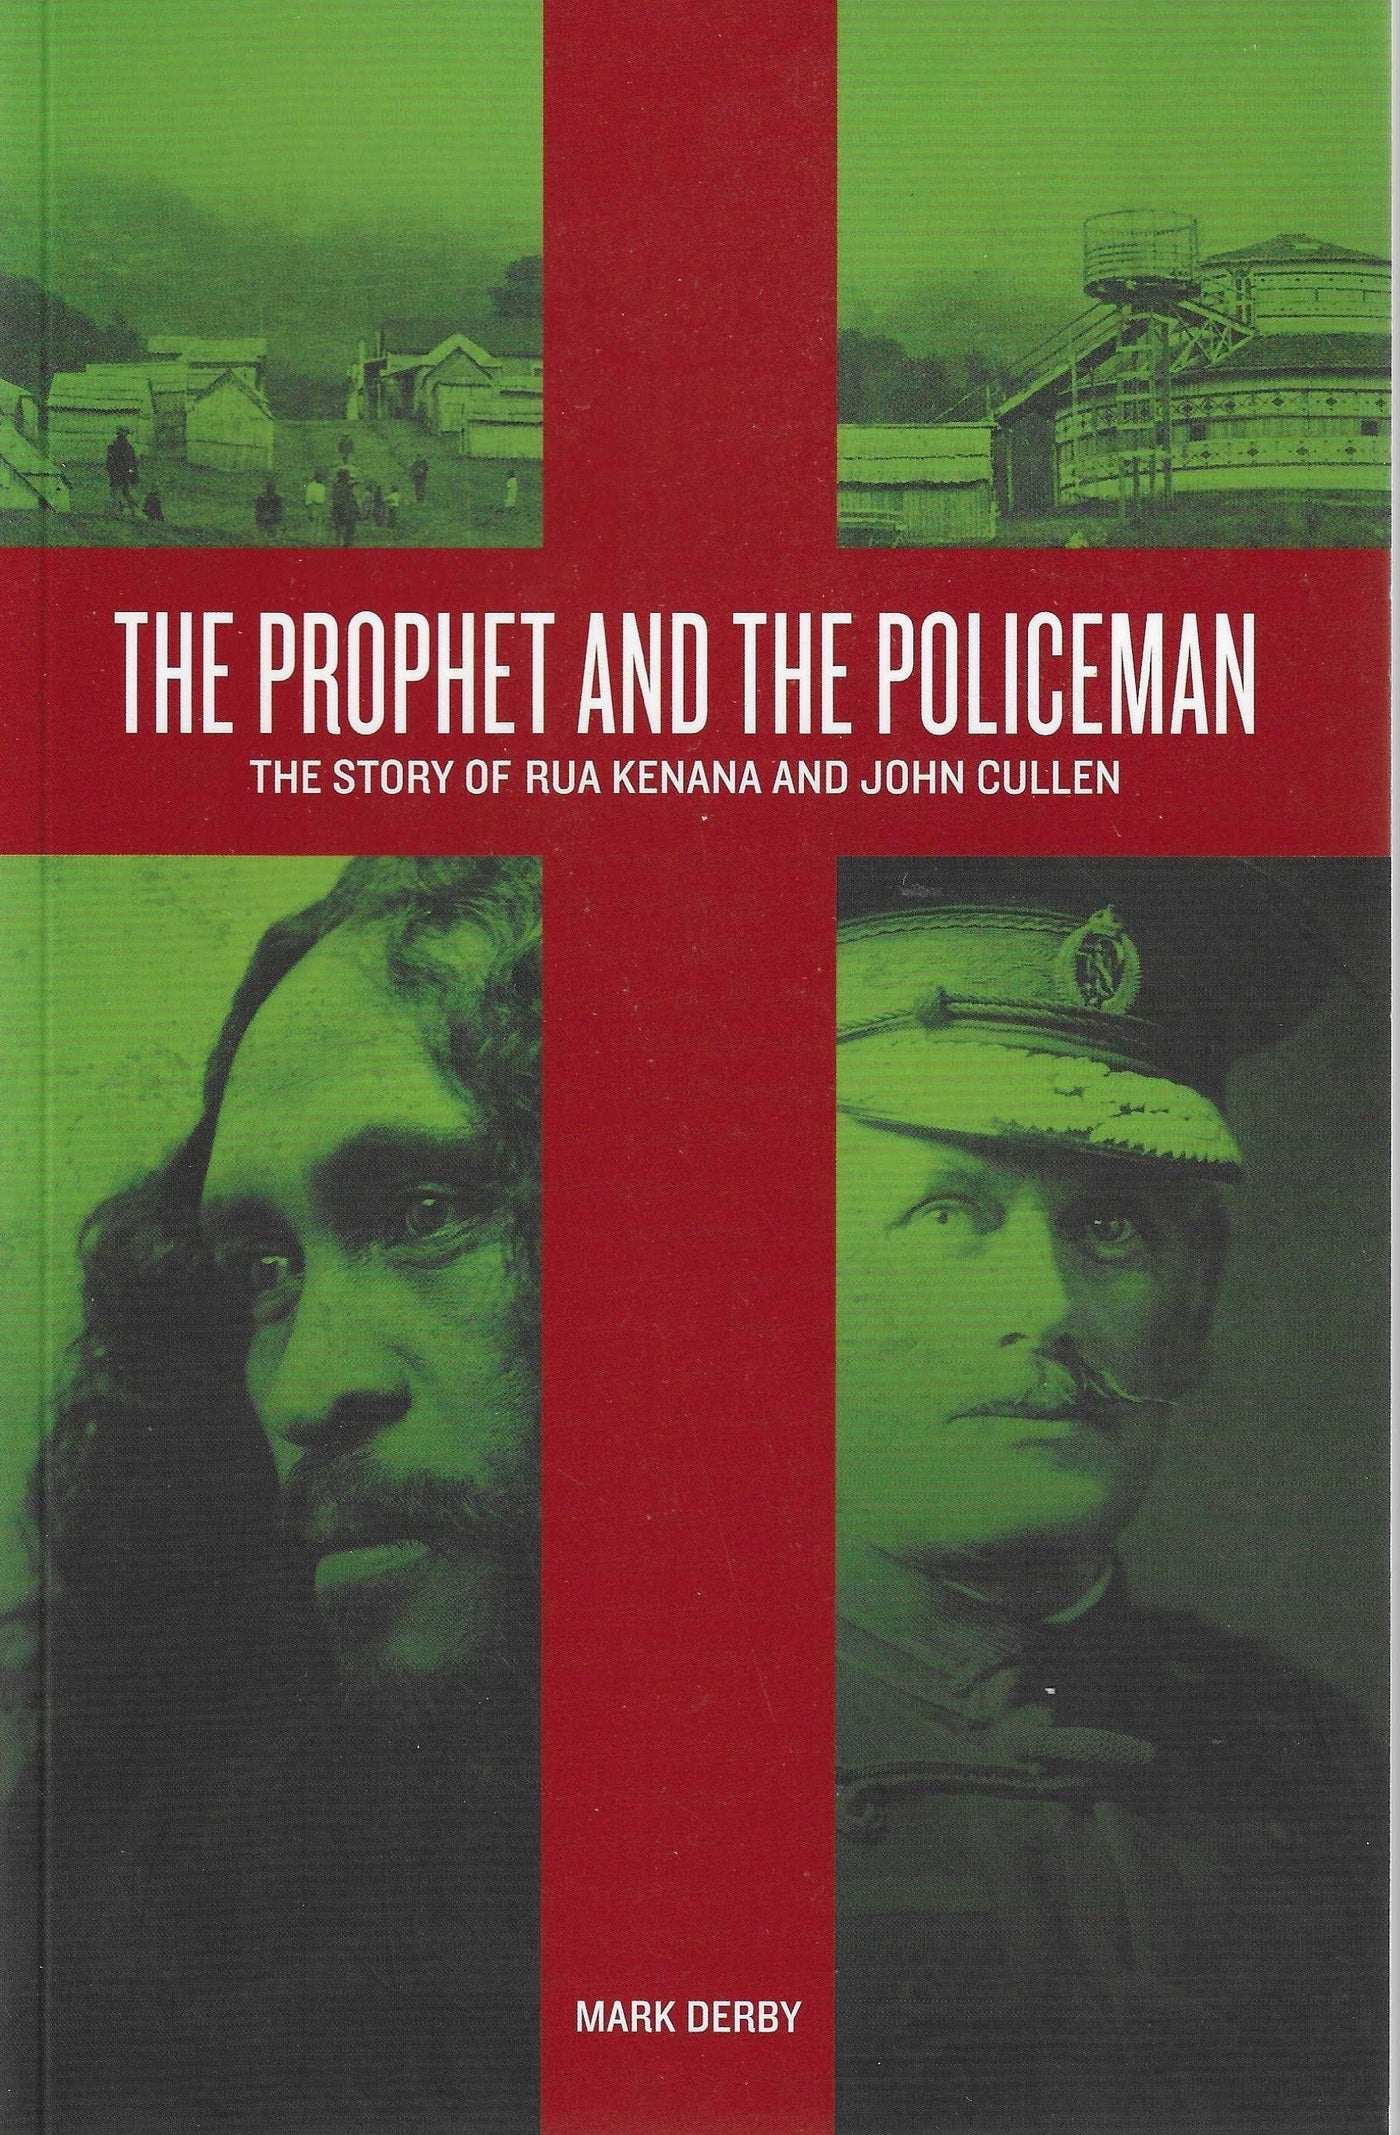 The Prophet and the Policeman: The Story of Rua Kenana and John Cullen